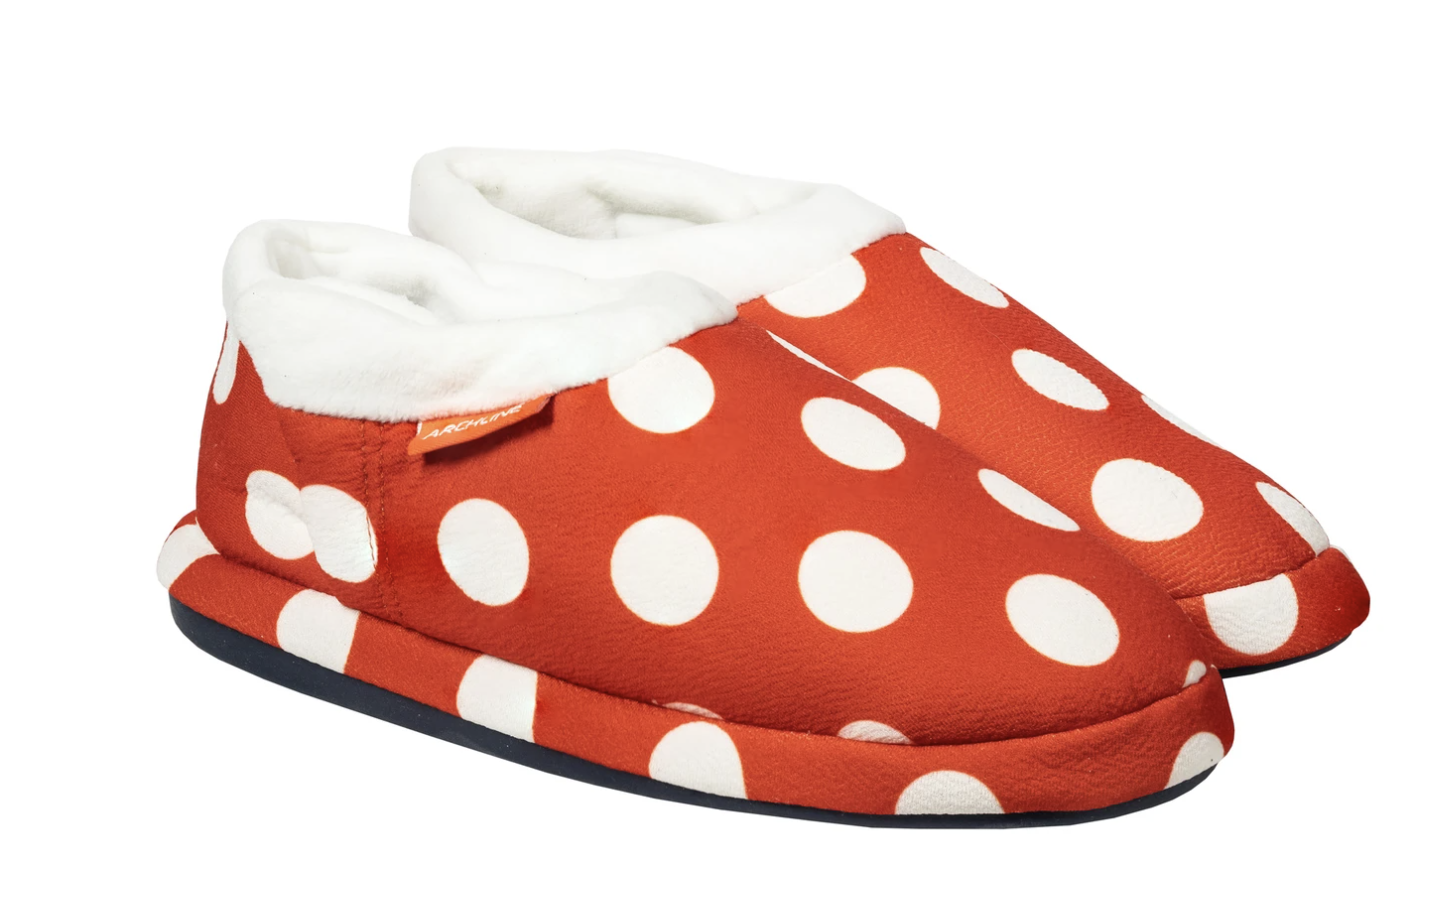 Orthotic Slippers CLOSED Back Scuffs Moccasins Pain Relief - Red Polka Dots - EUR 41 (Womens 10 US)